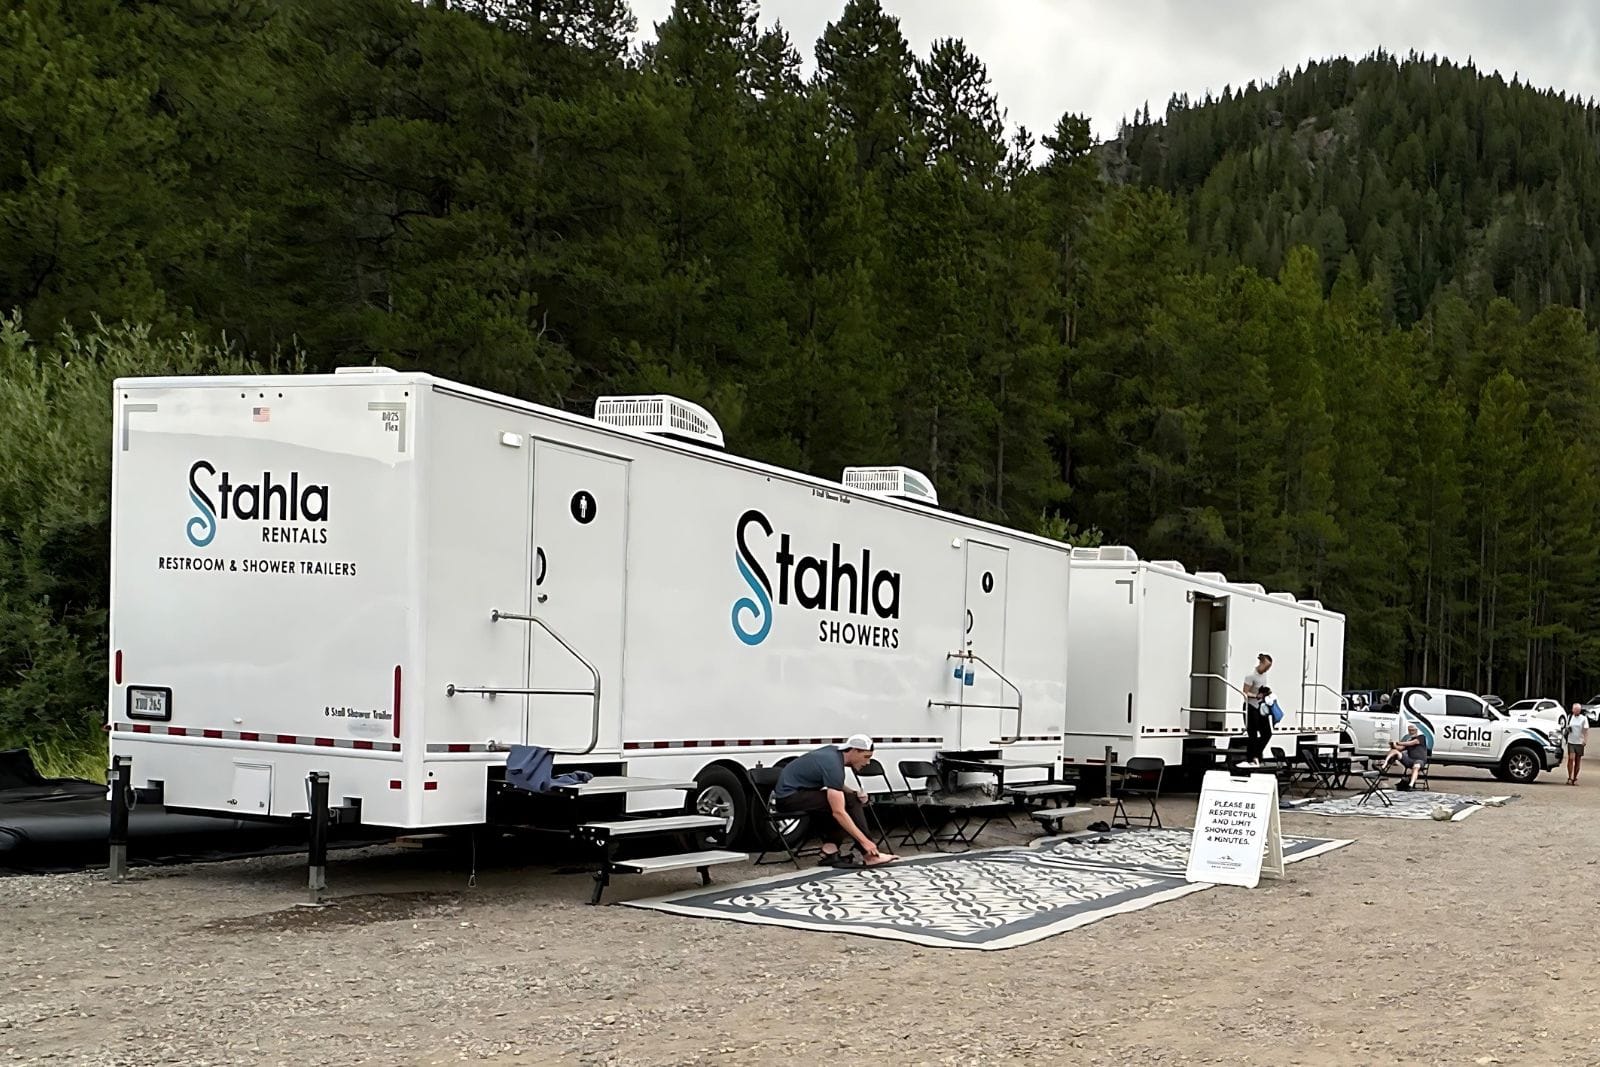 Stahla Rentals mobile Shower trailers parked outdoors in Santa Fe,New Mexico